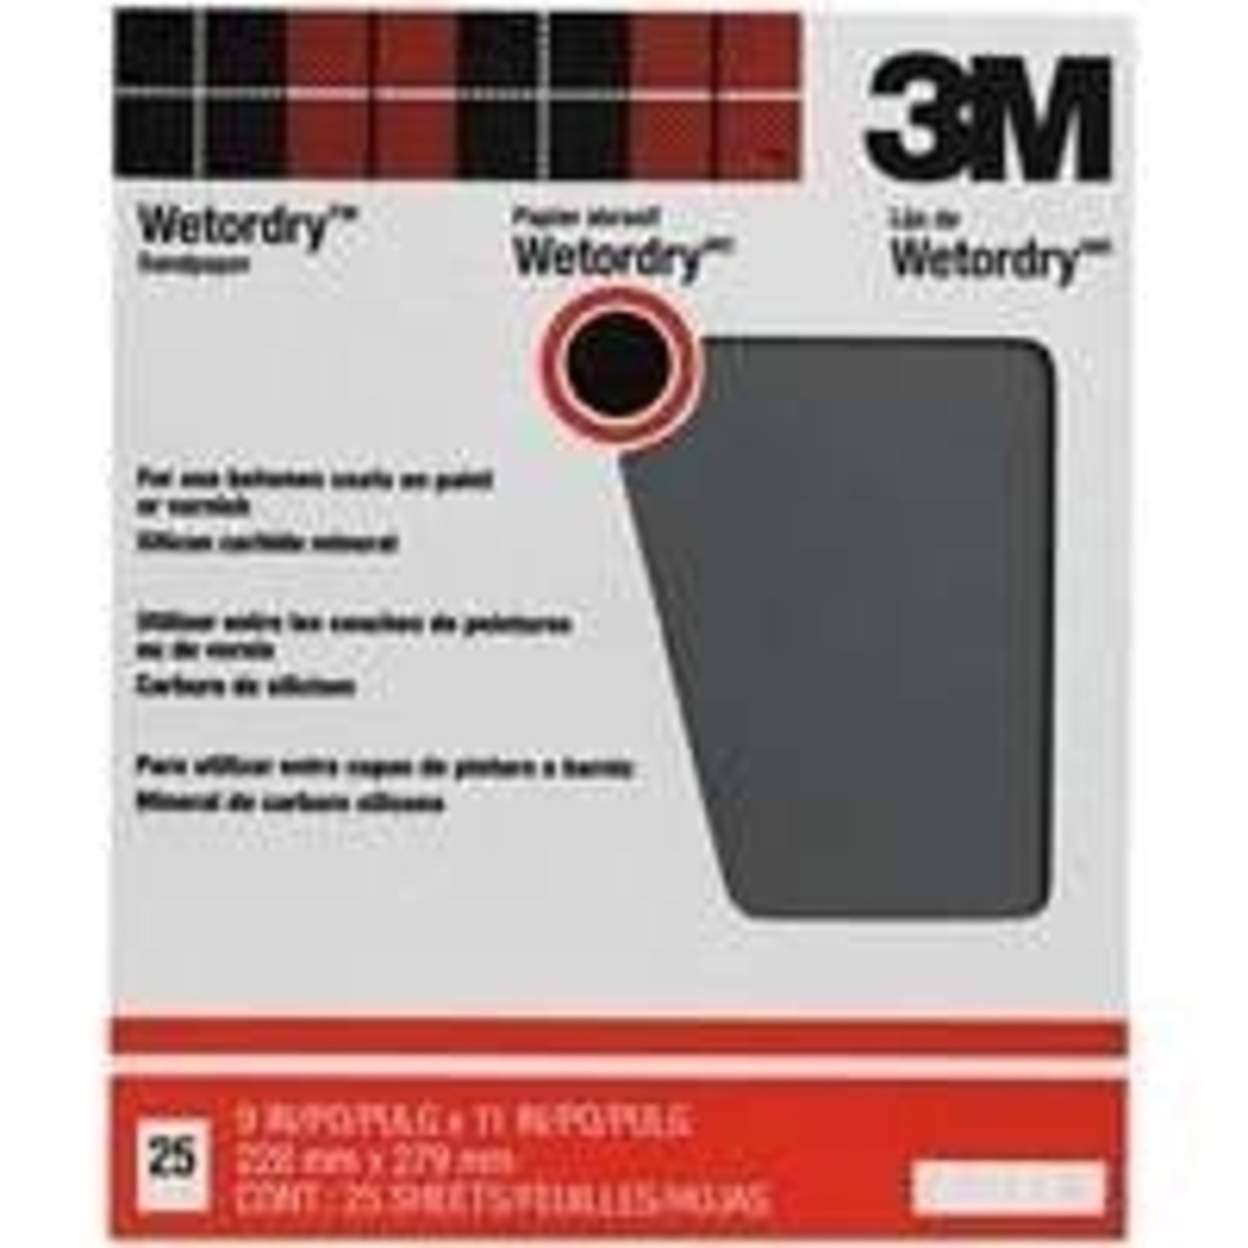 3M Wet and Dry Sanding Sheets - 120C-Grit, 9" x 11", 25pk